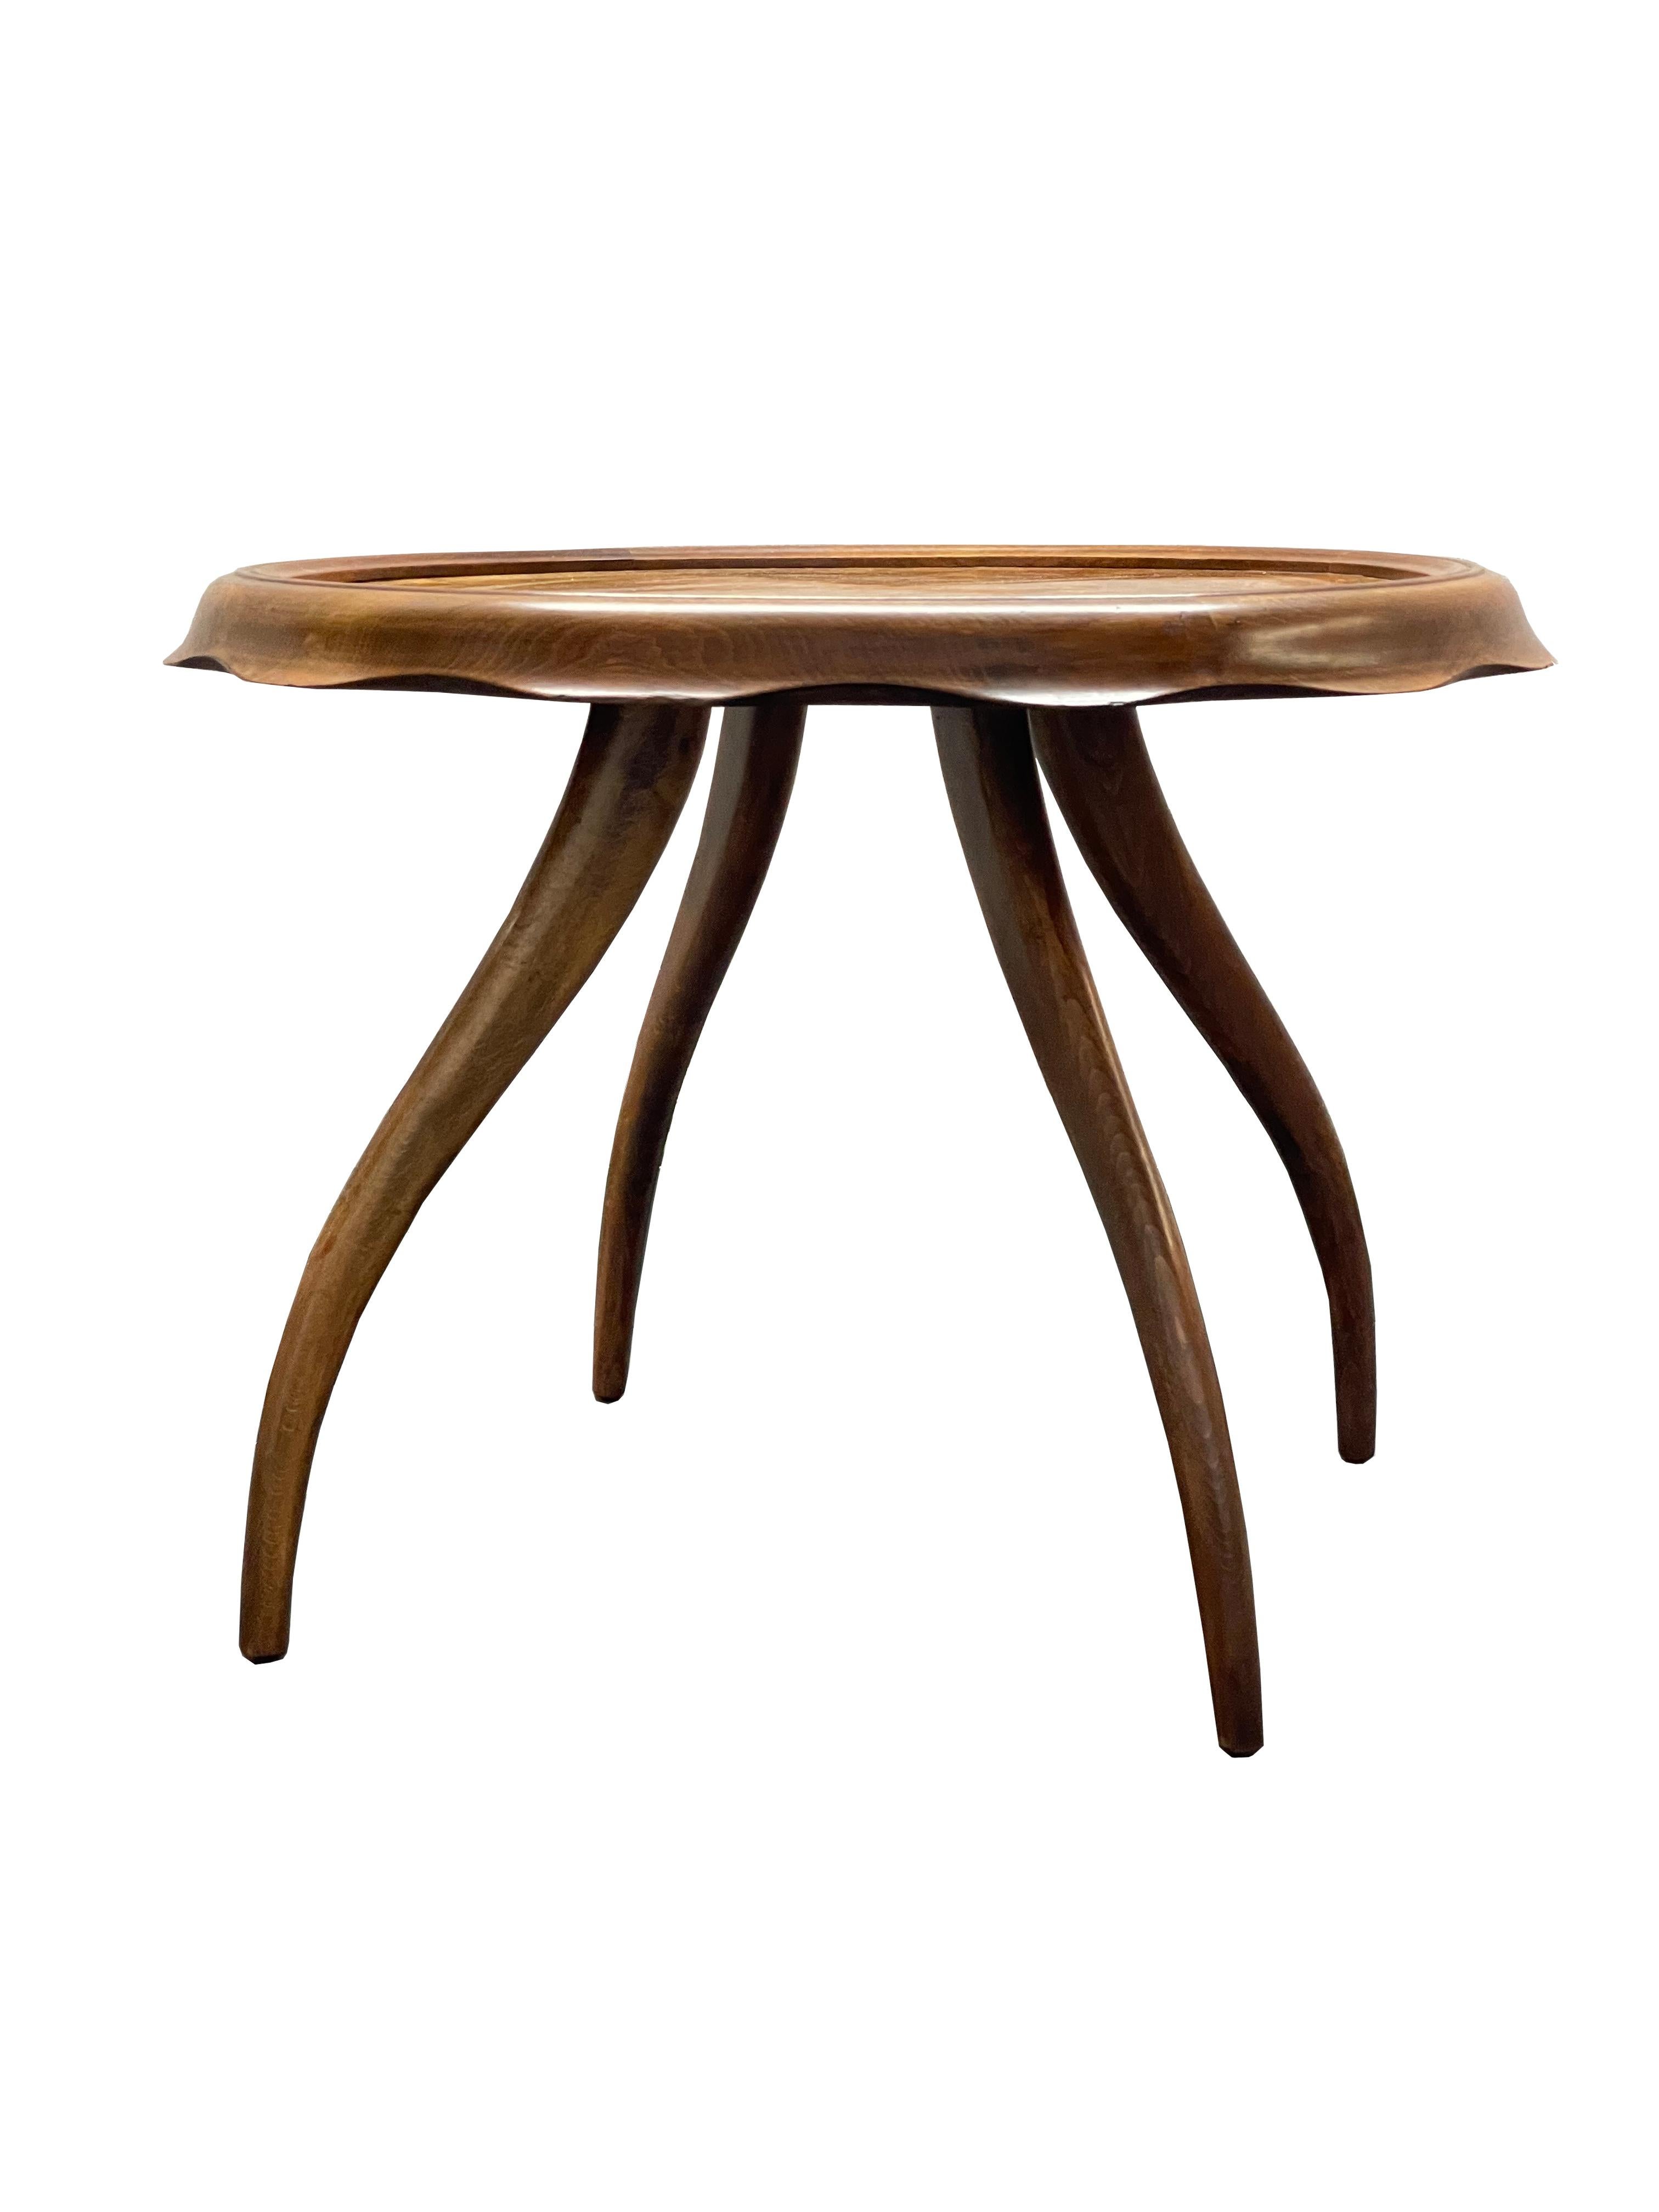 Charming Italian 1940’s hand-made occasional table with a scalloped edge. In blond walnut with an inlayed burl center. Designed by Osvaldo Borsani. 

A reference to the English Pie Crust table. The swooped legs and scalloped top edge combine to